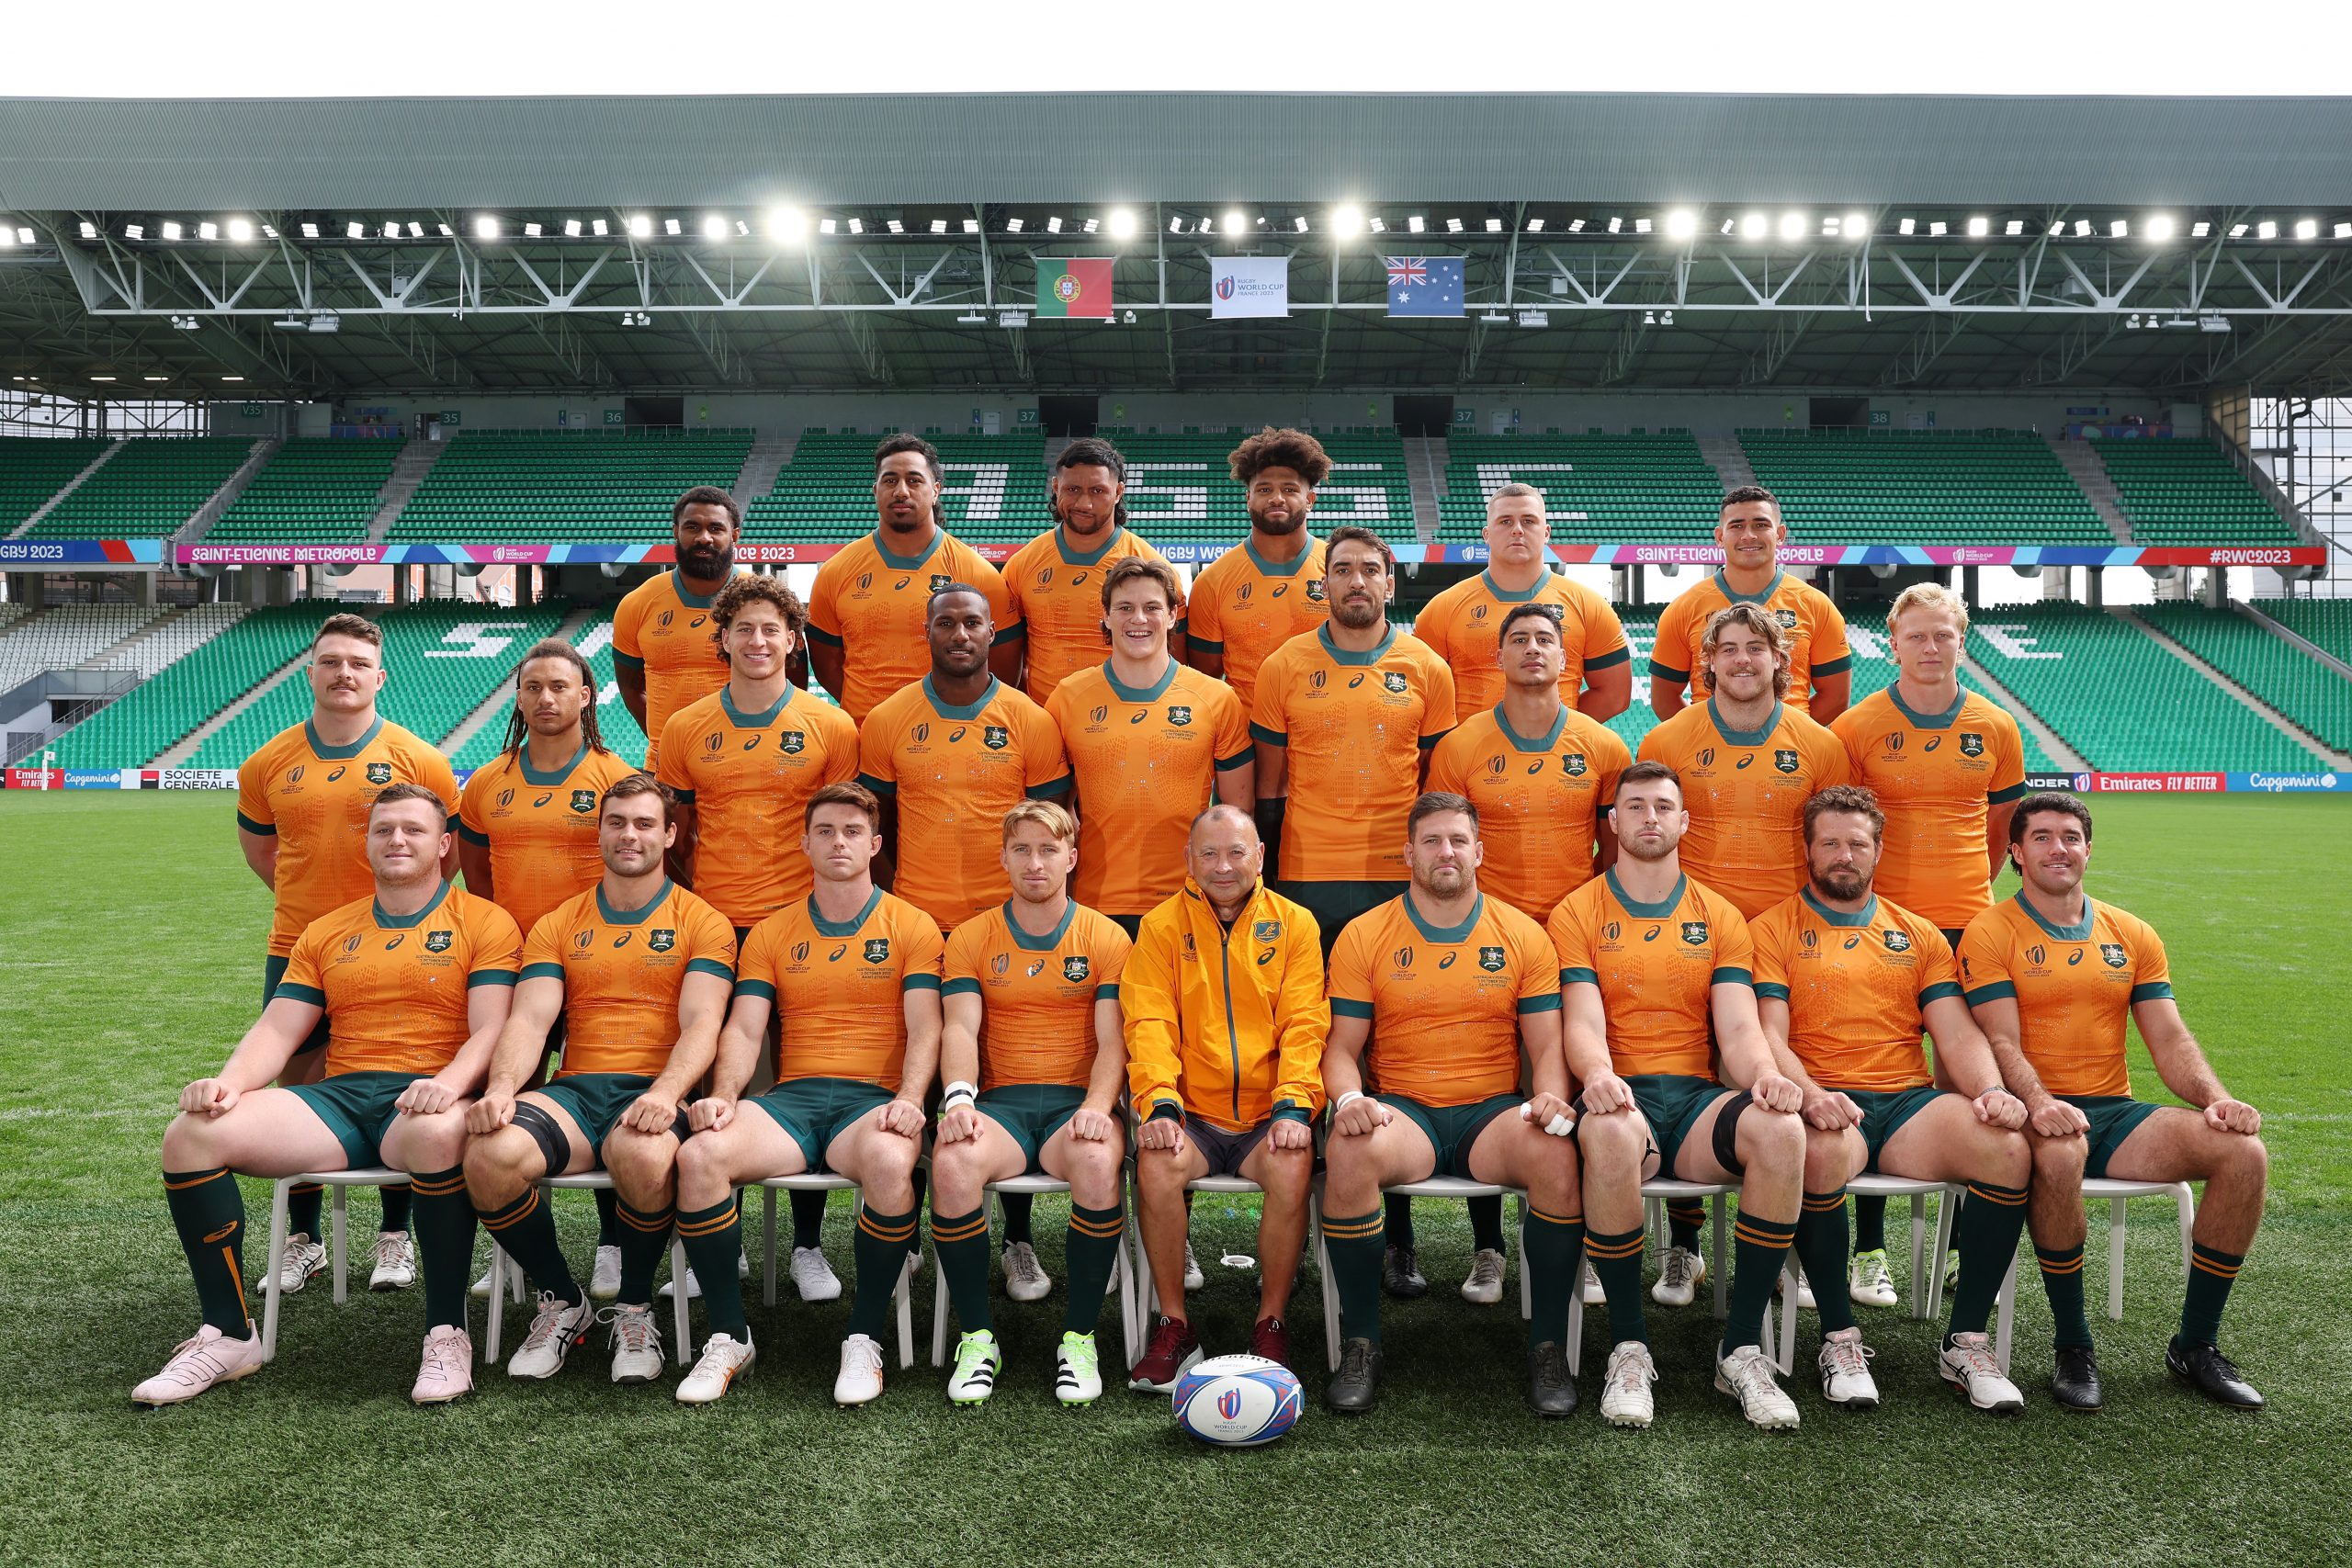 The Wallabies pose for the team photograph ahead of their Rugby World Cup France 2023 match against Portugal.